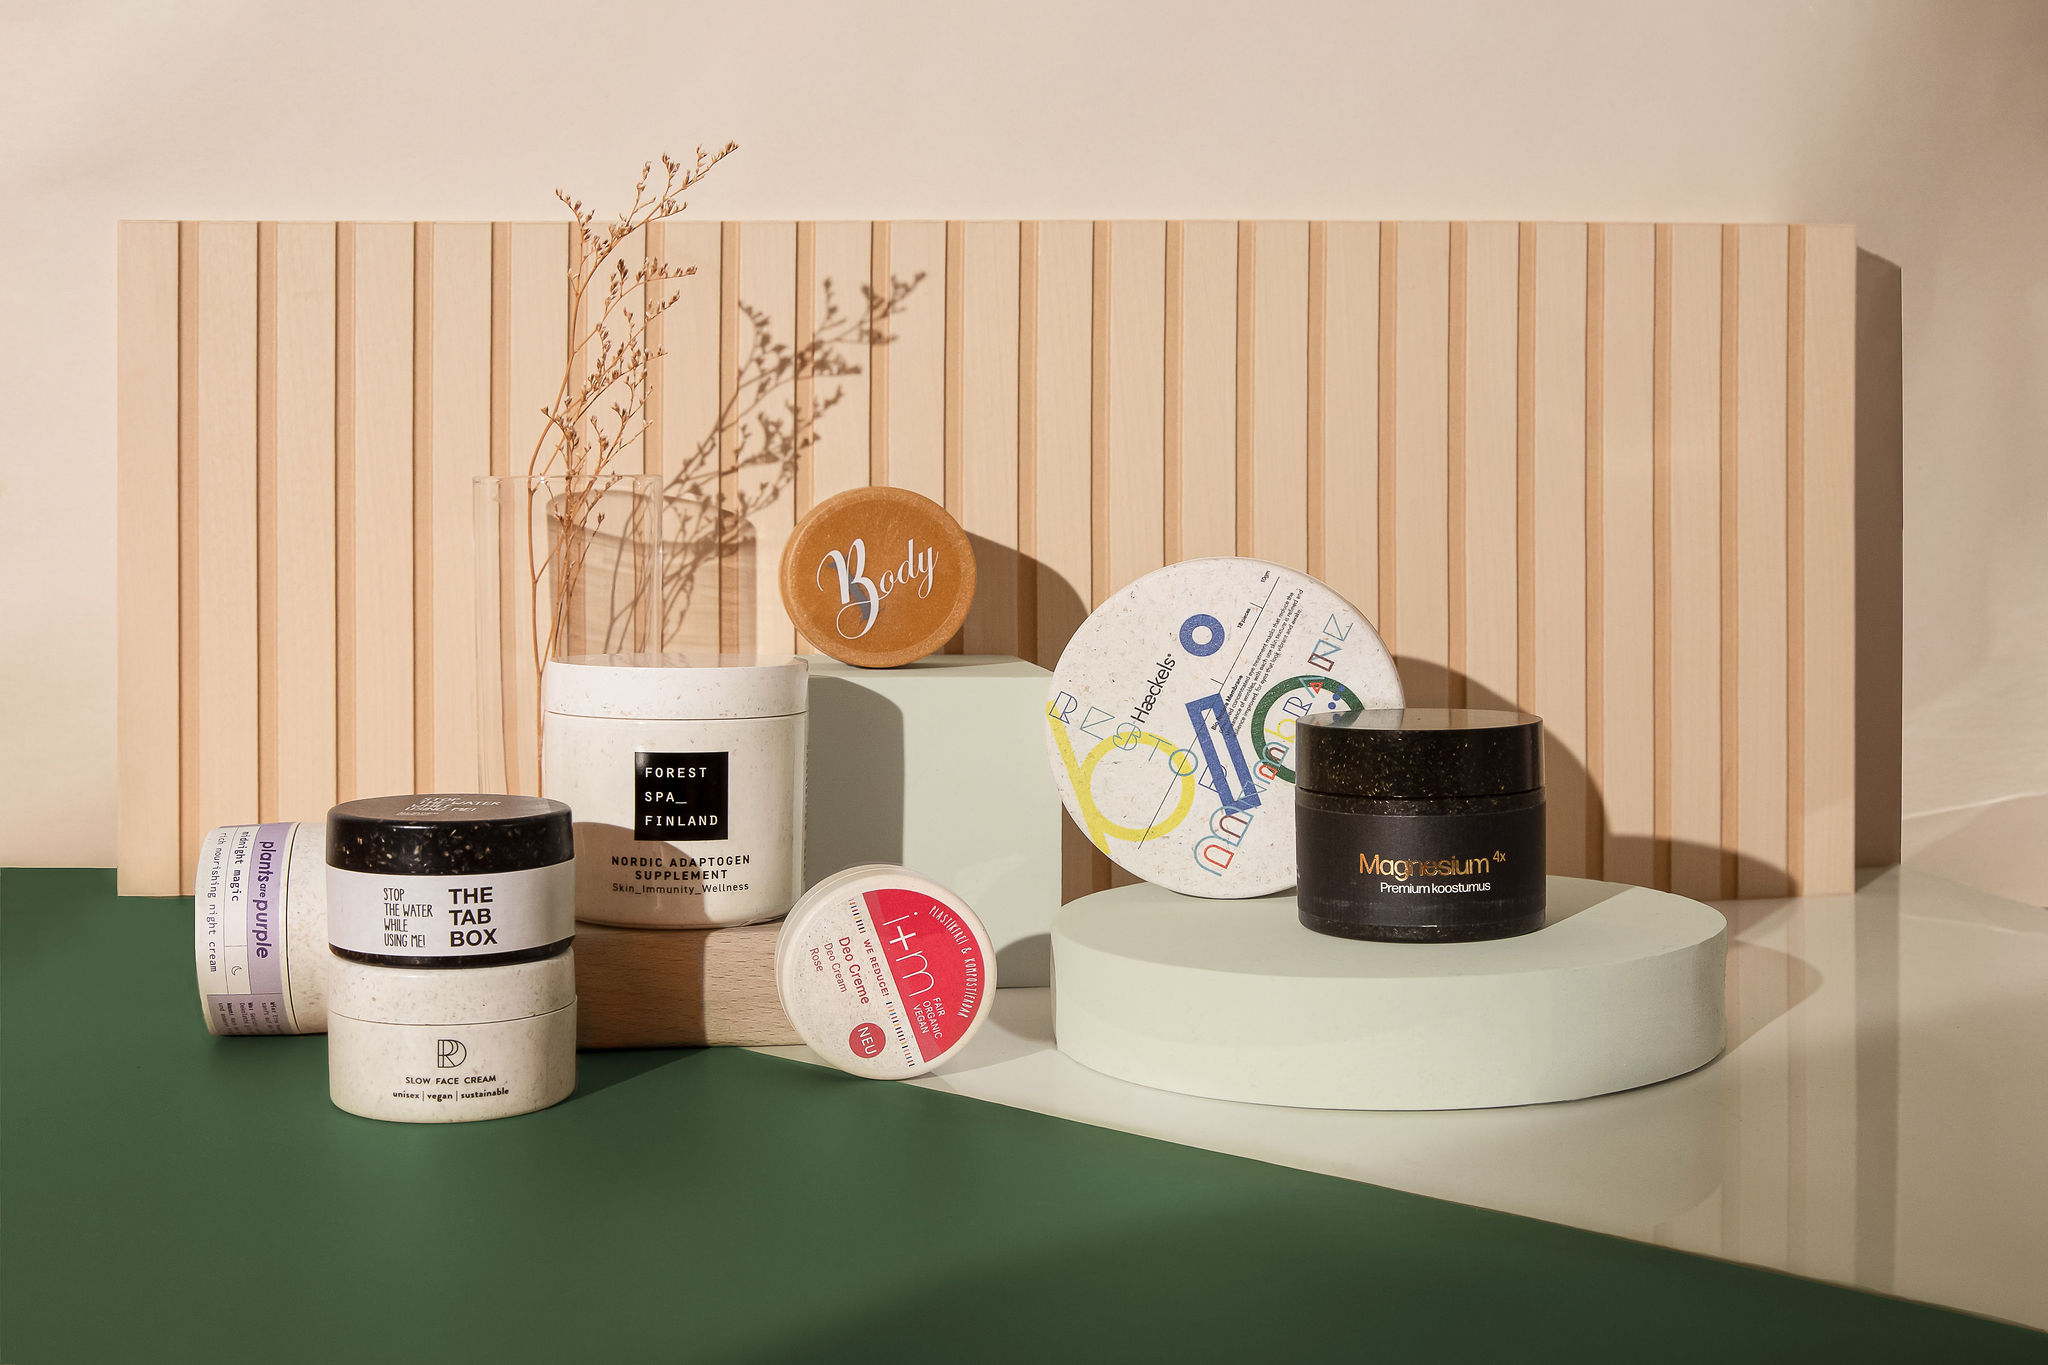 Cosmetic packaging made of Sulapac can be labeled with various techniques in an eco-friendly way.